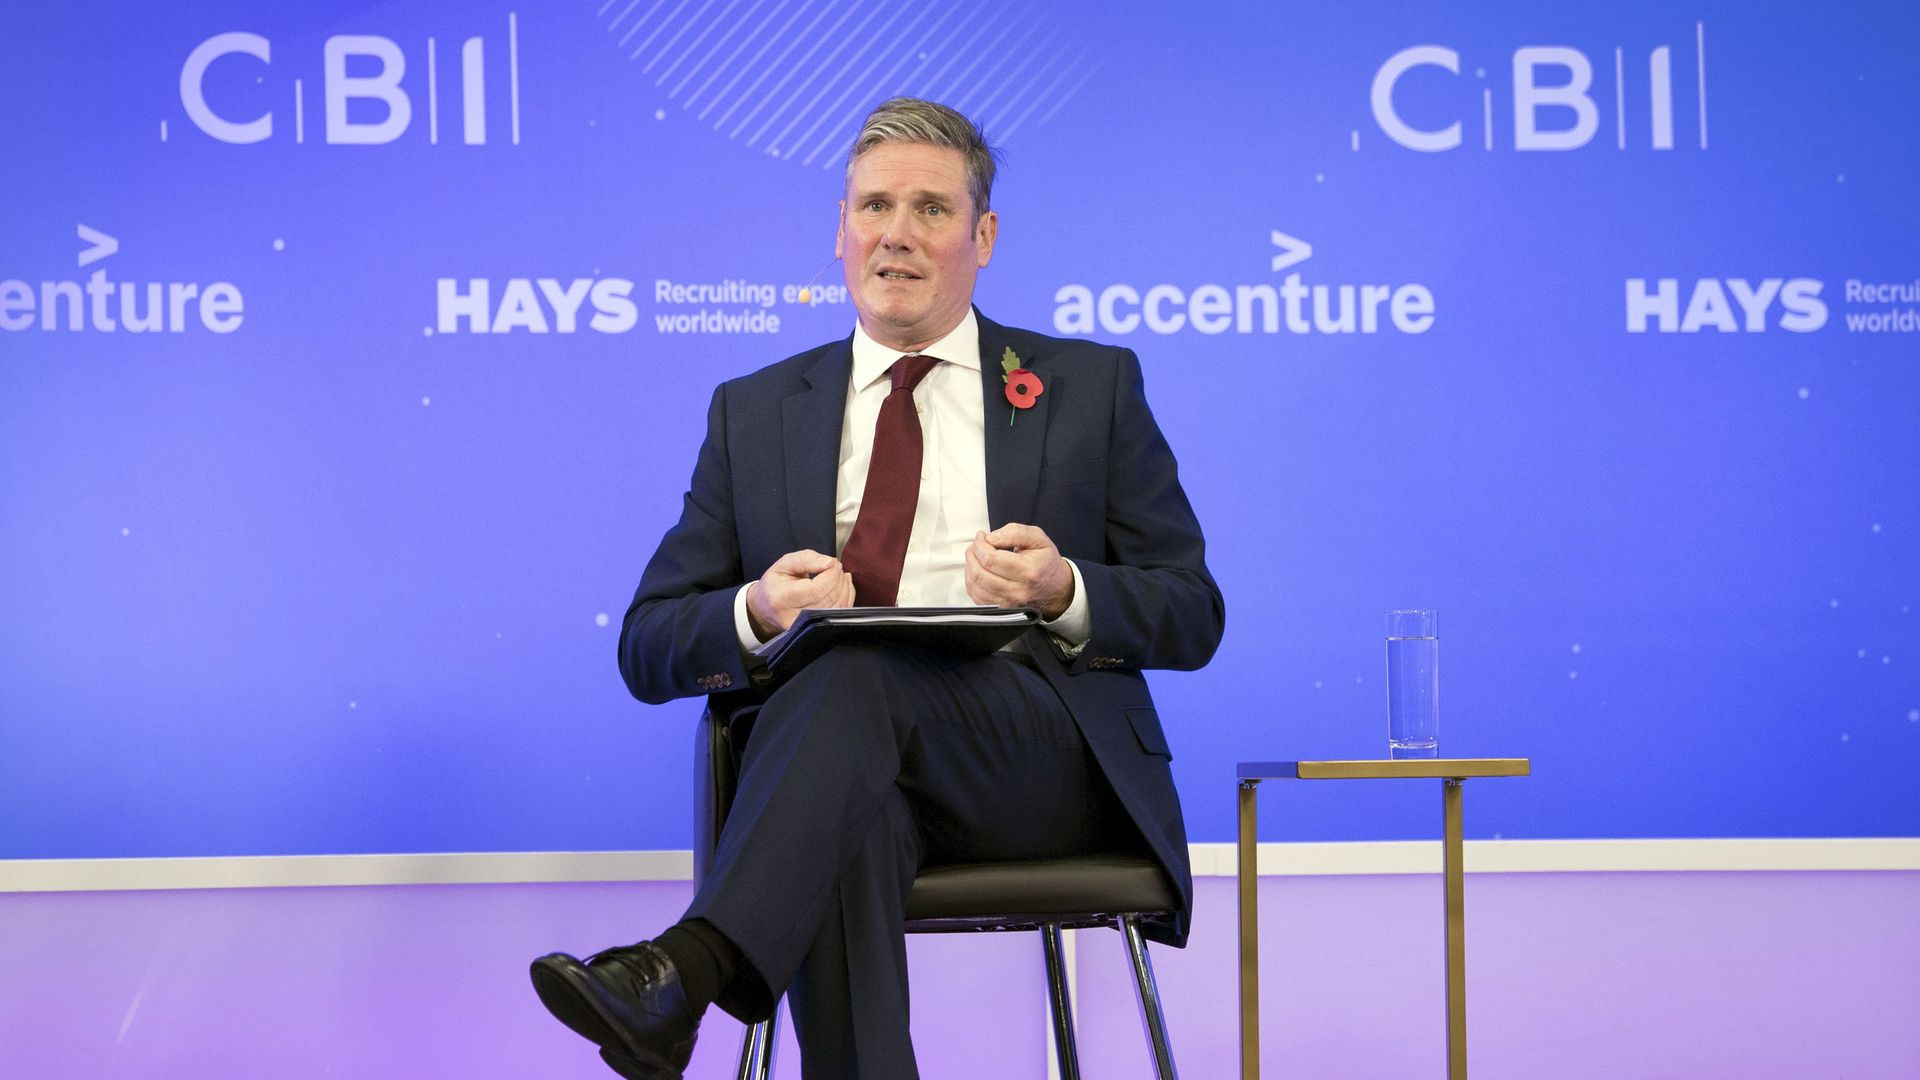 Labour Party leader Sir Keir Starmer speaking during the CBI annual conference at ITN Headquarters in central London. - Credit: PA